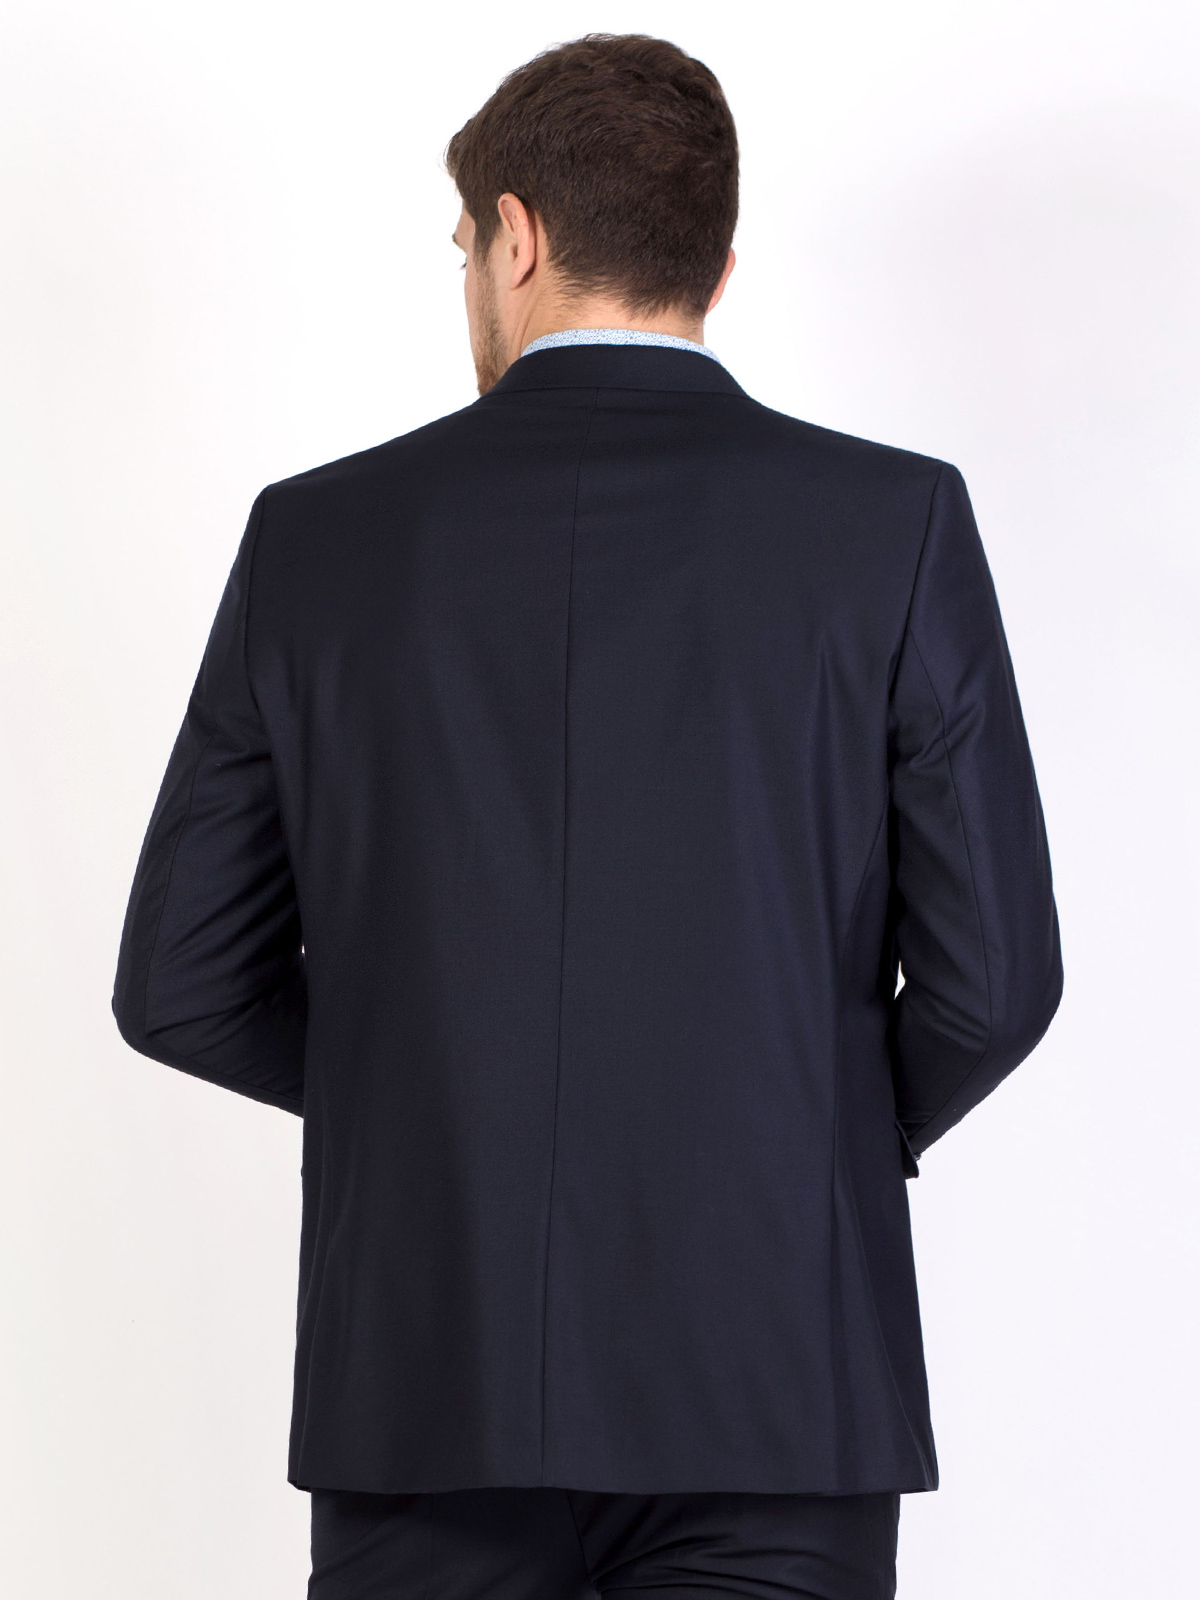  fitted dark blue classic jacket  - 64111 € 107.98 img4